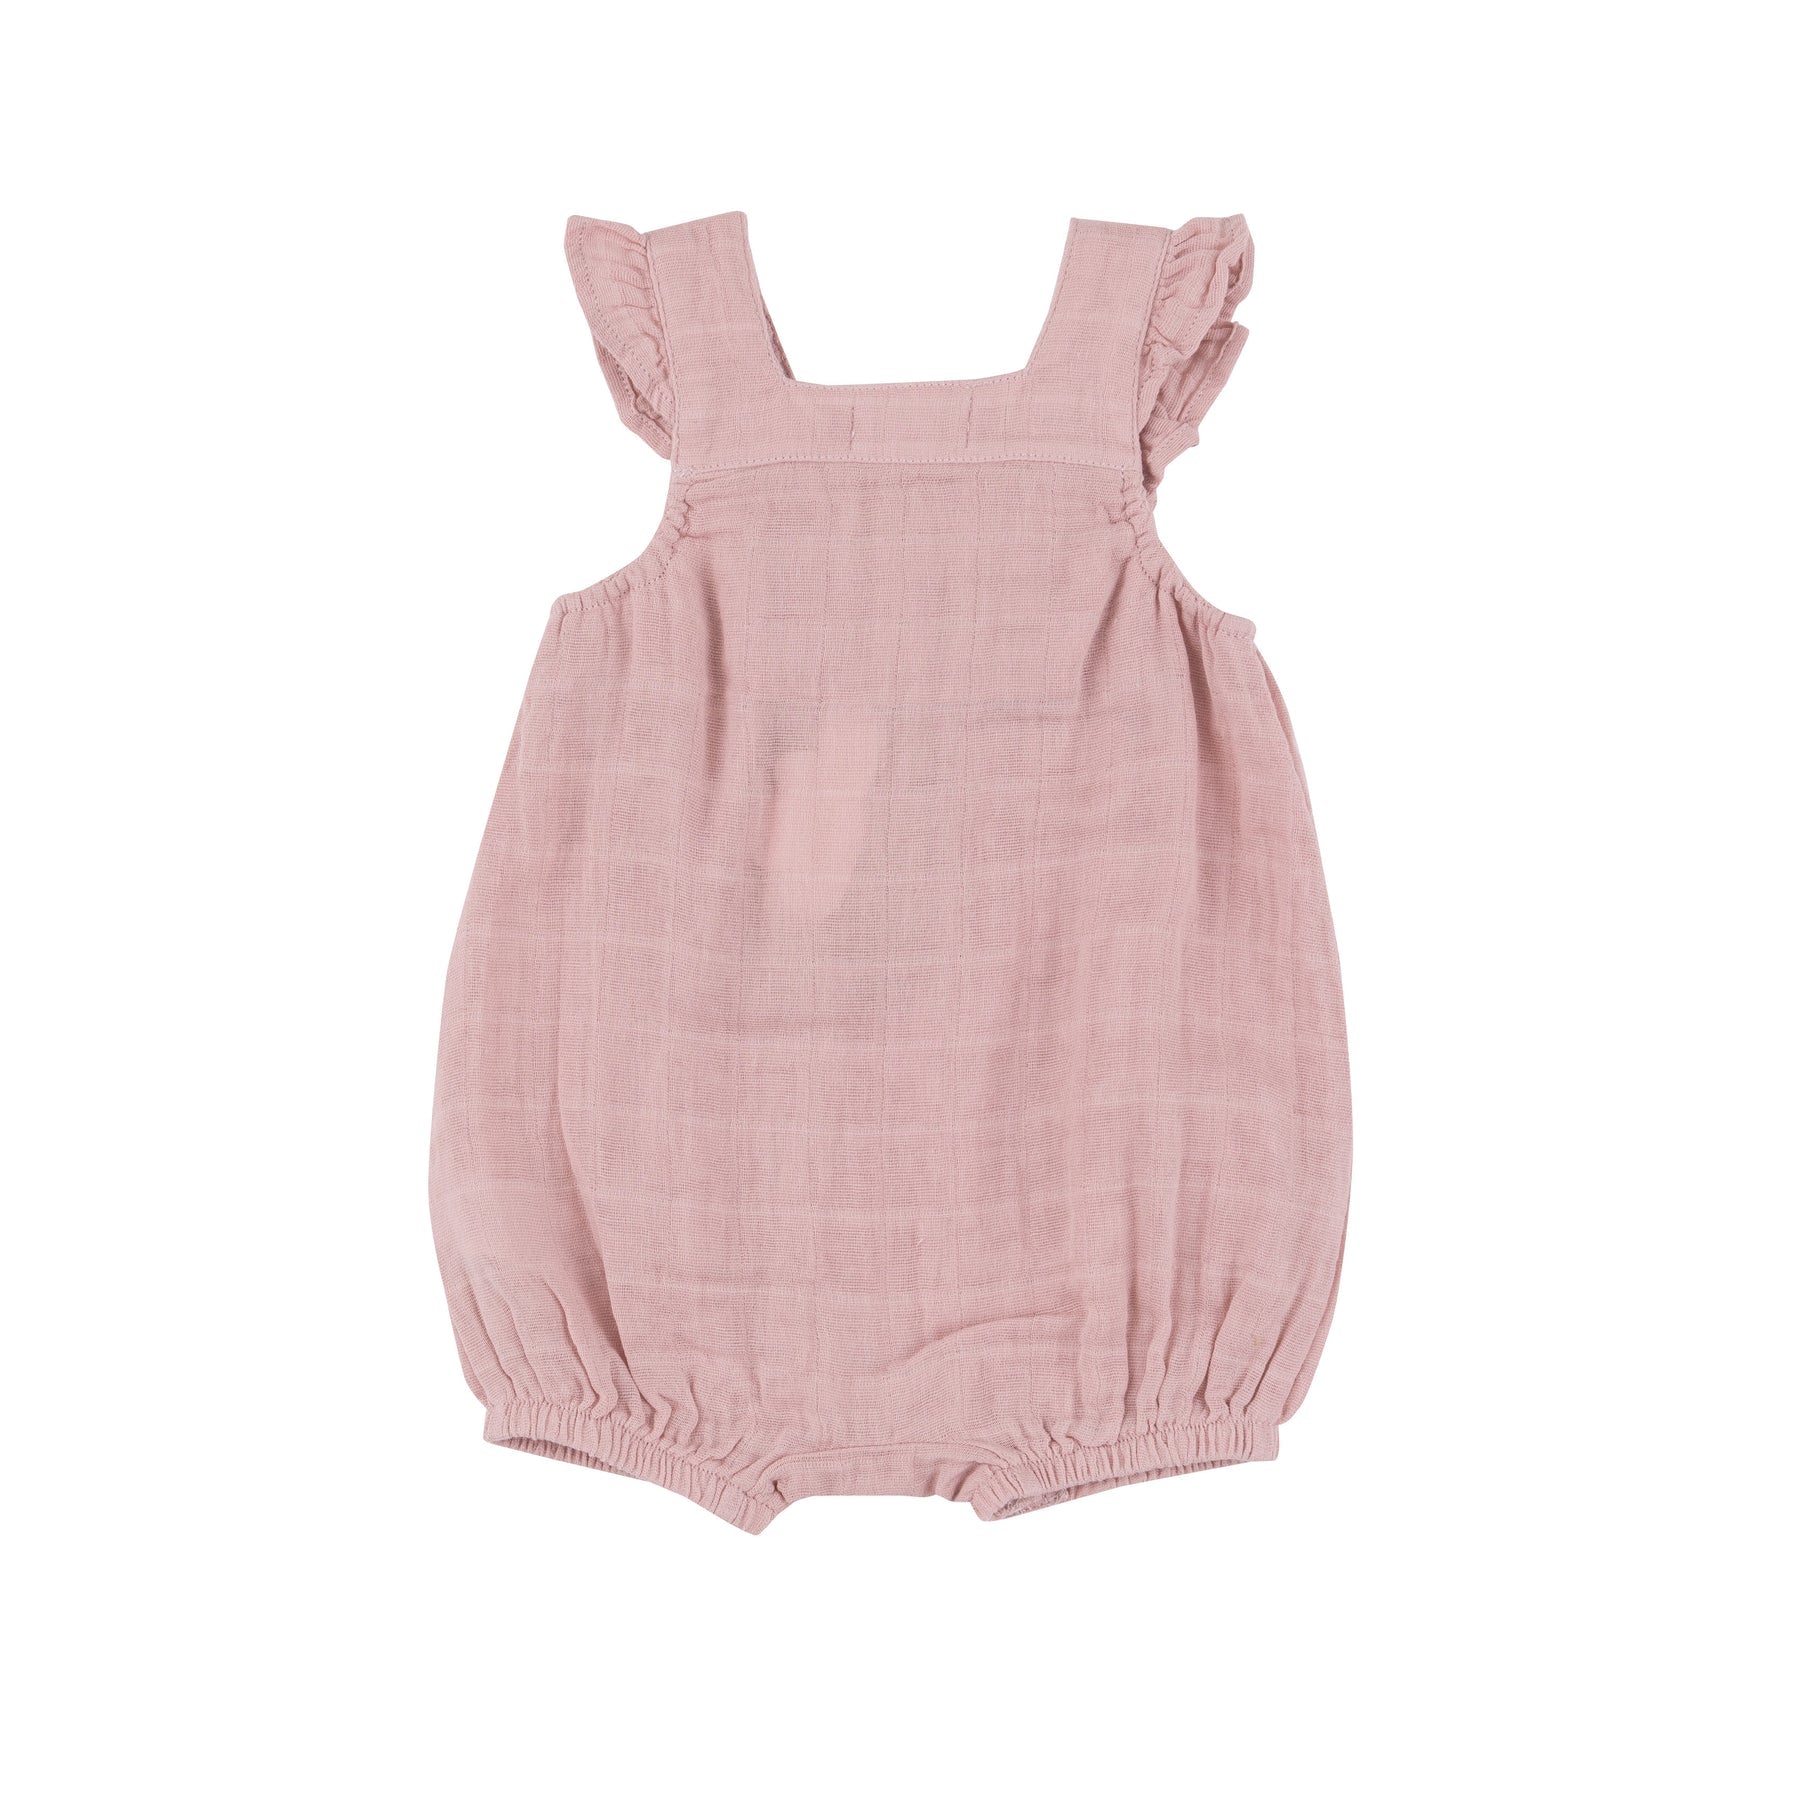 Dusty Pink Muslin Smocked Front Overall Shortie